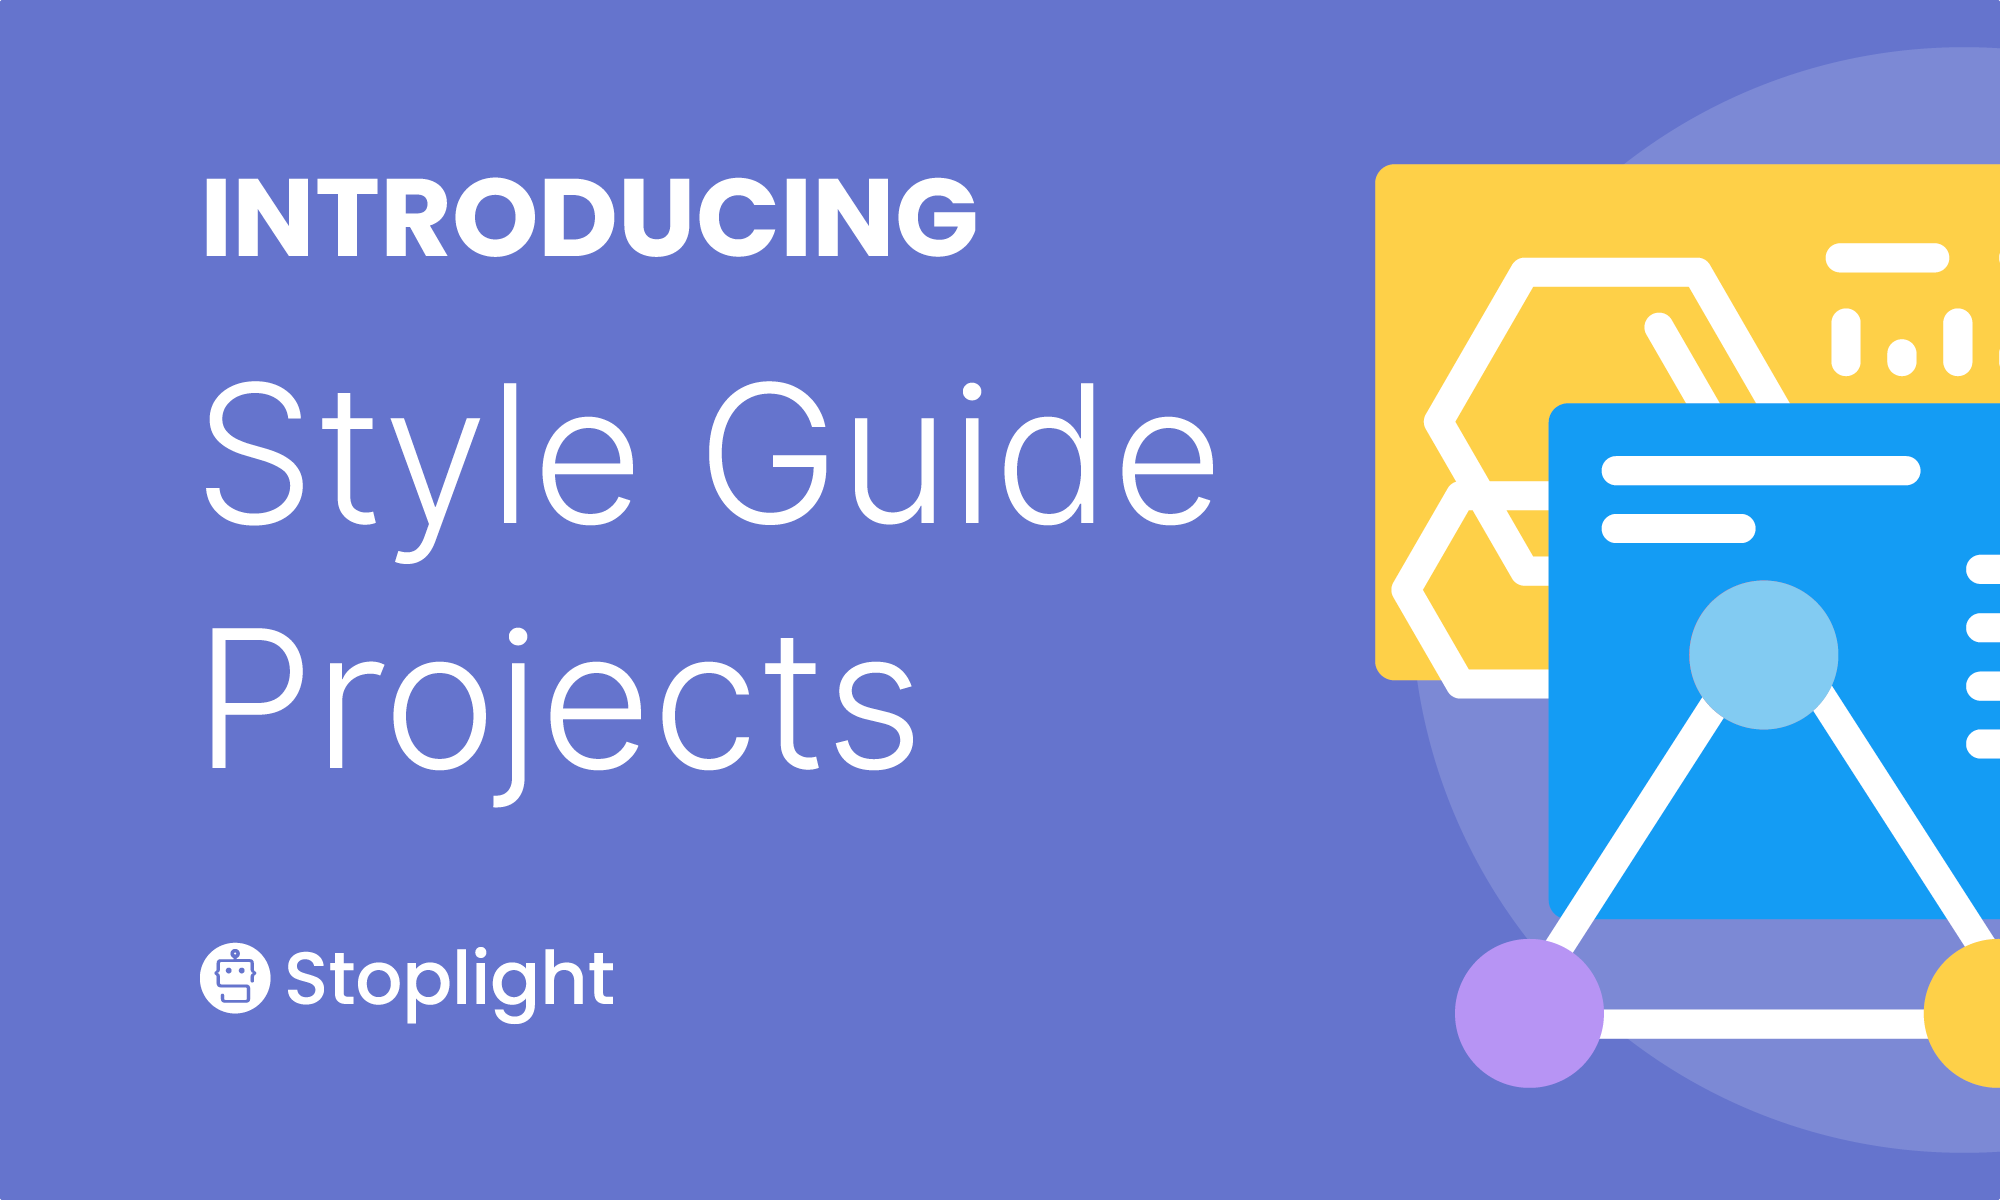 Introducing Style Guide Projects